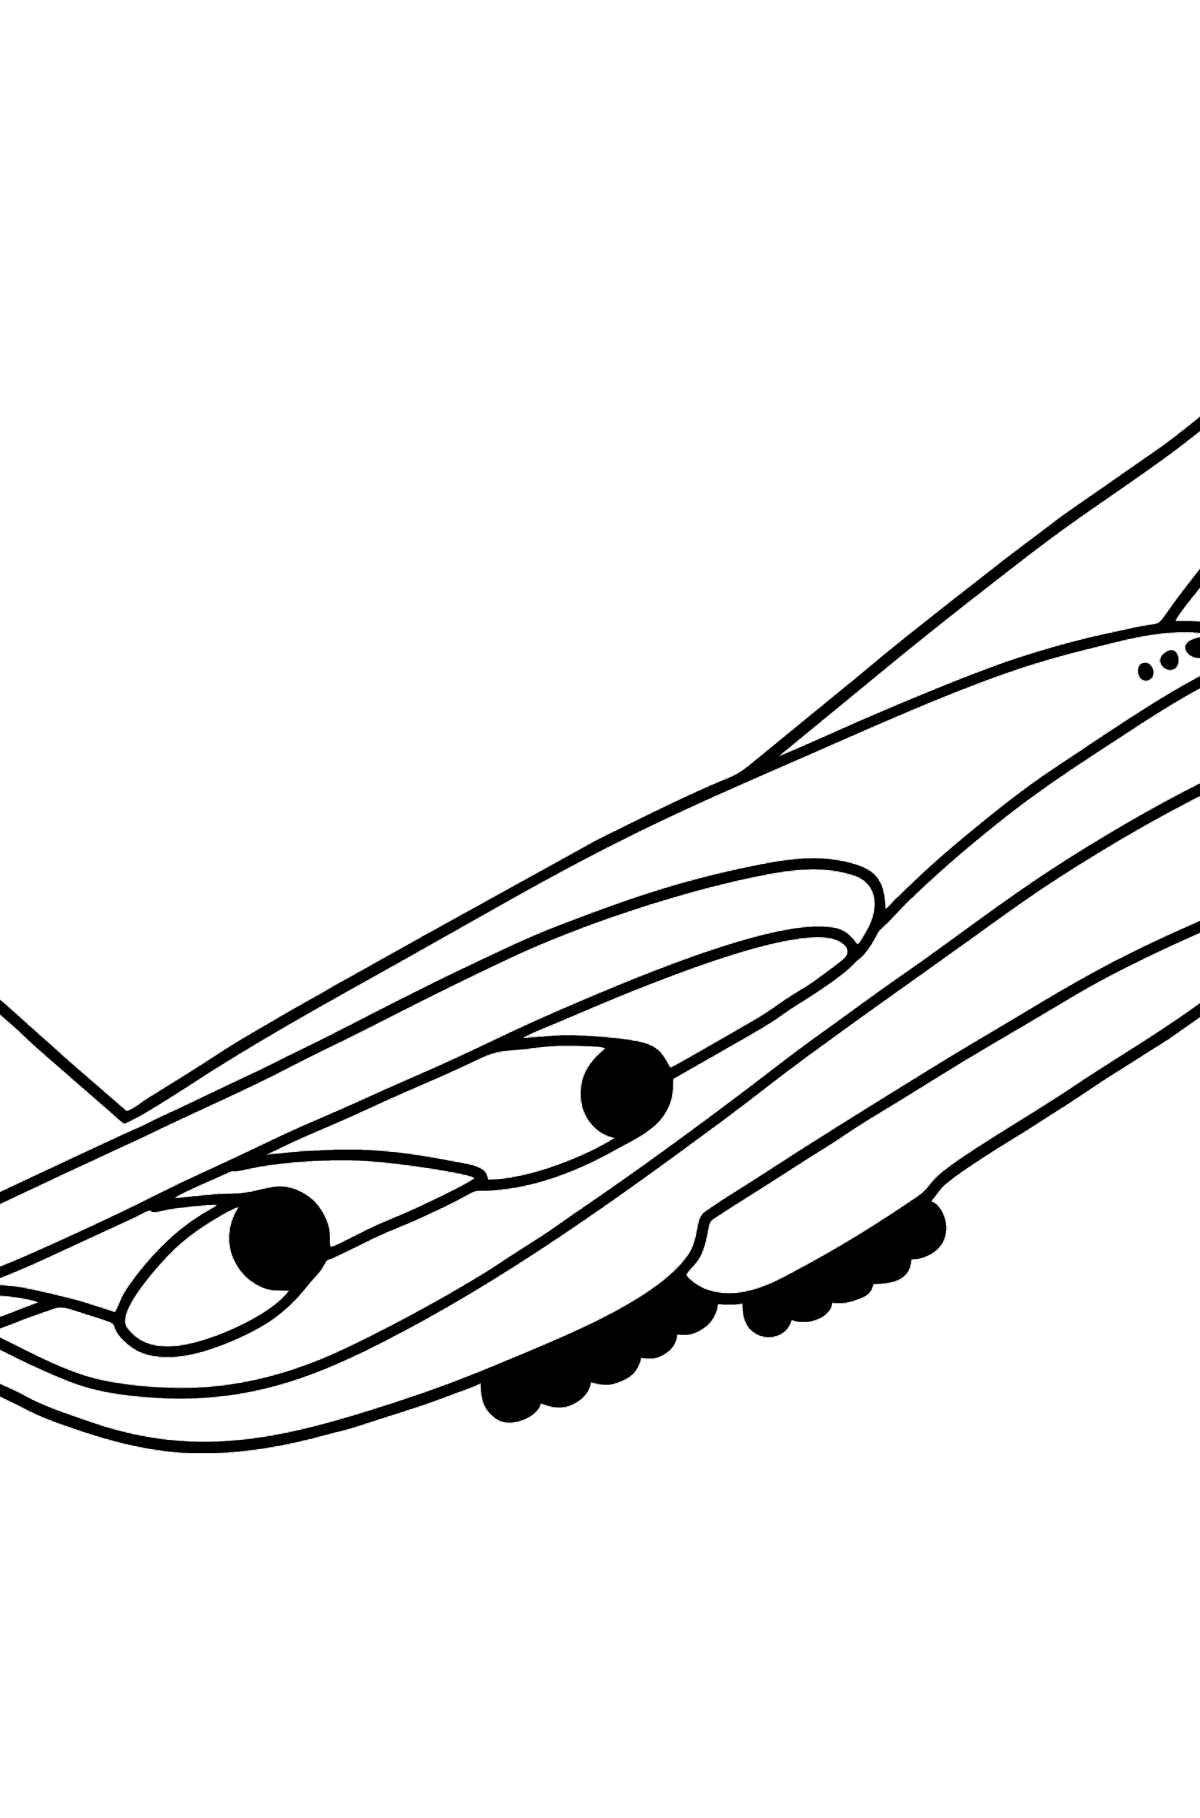 Boeing 747 coloring page - Coloring Pages for Kids